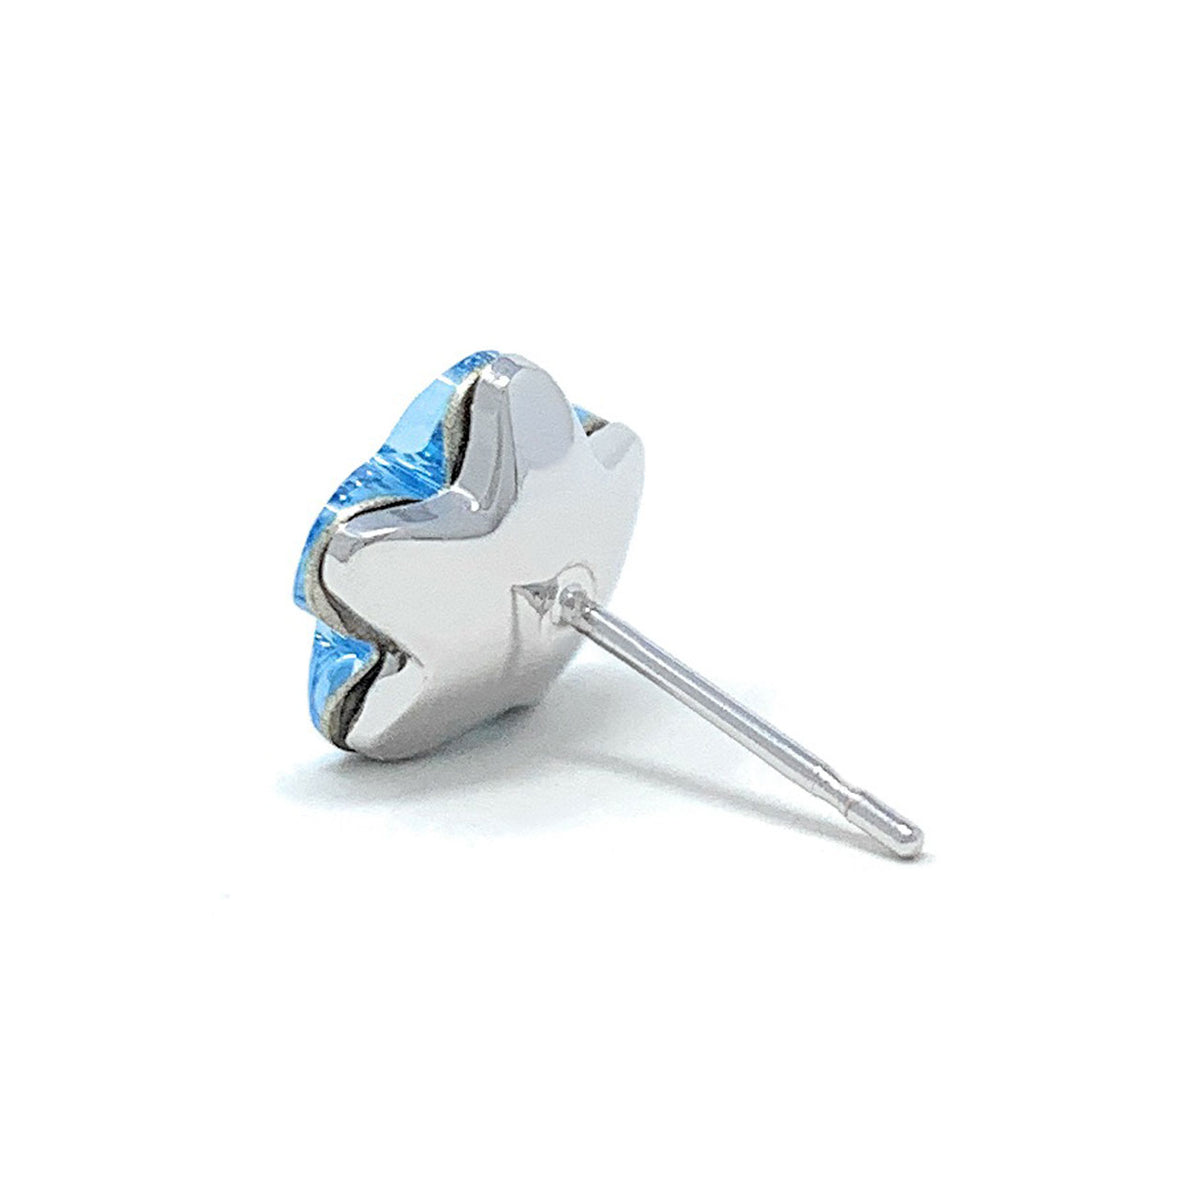 Anna Stud Earrings with Blue Aquamarine Flower Crystals from Swarovski Silver Toned Rhodium Plated - Ed Heart